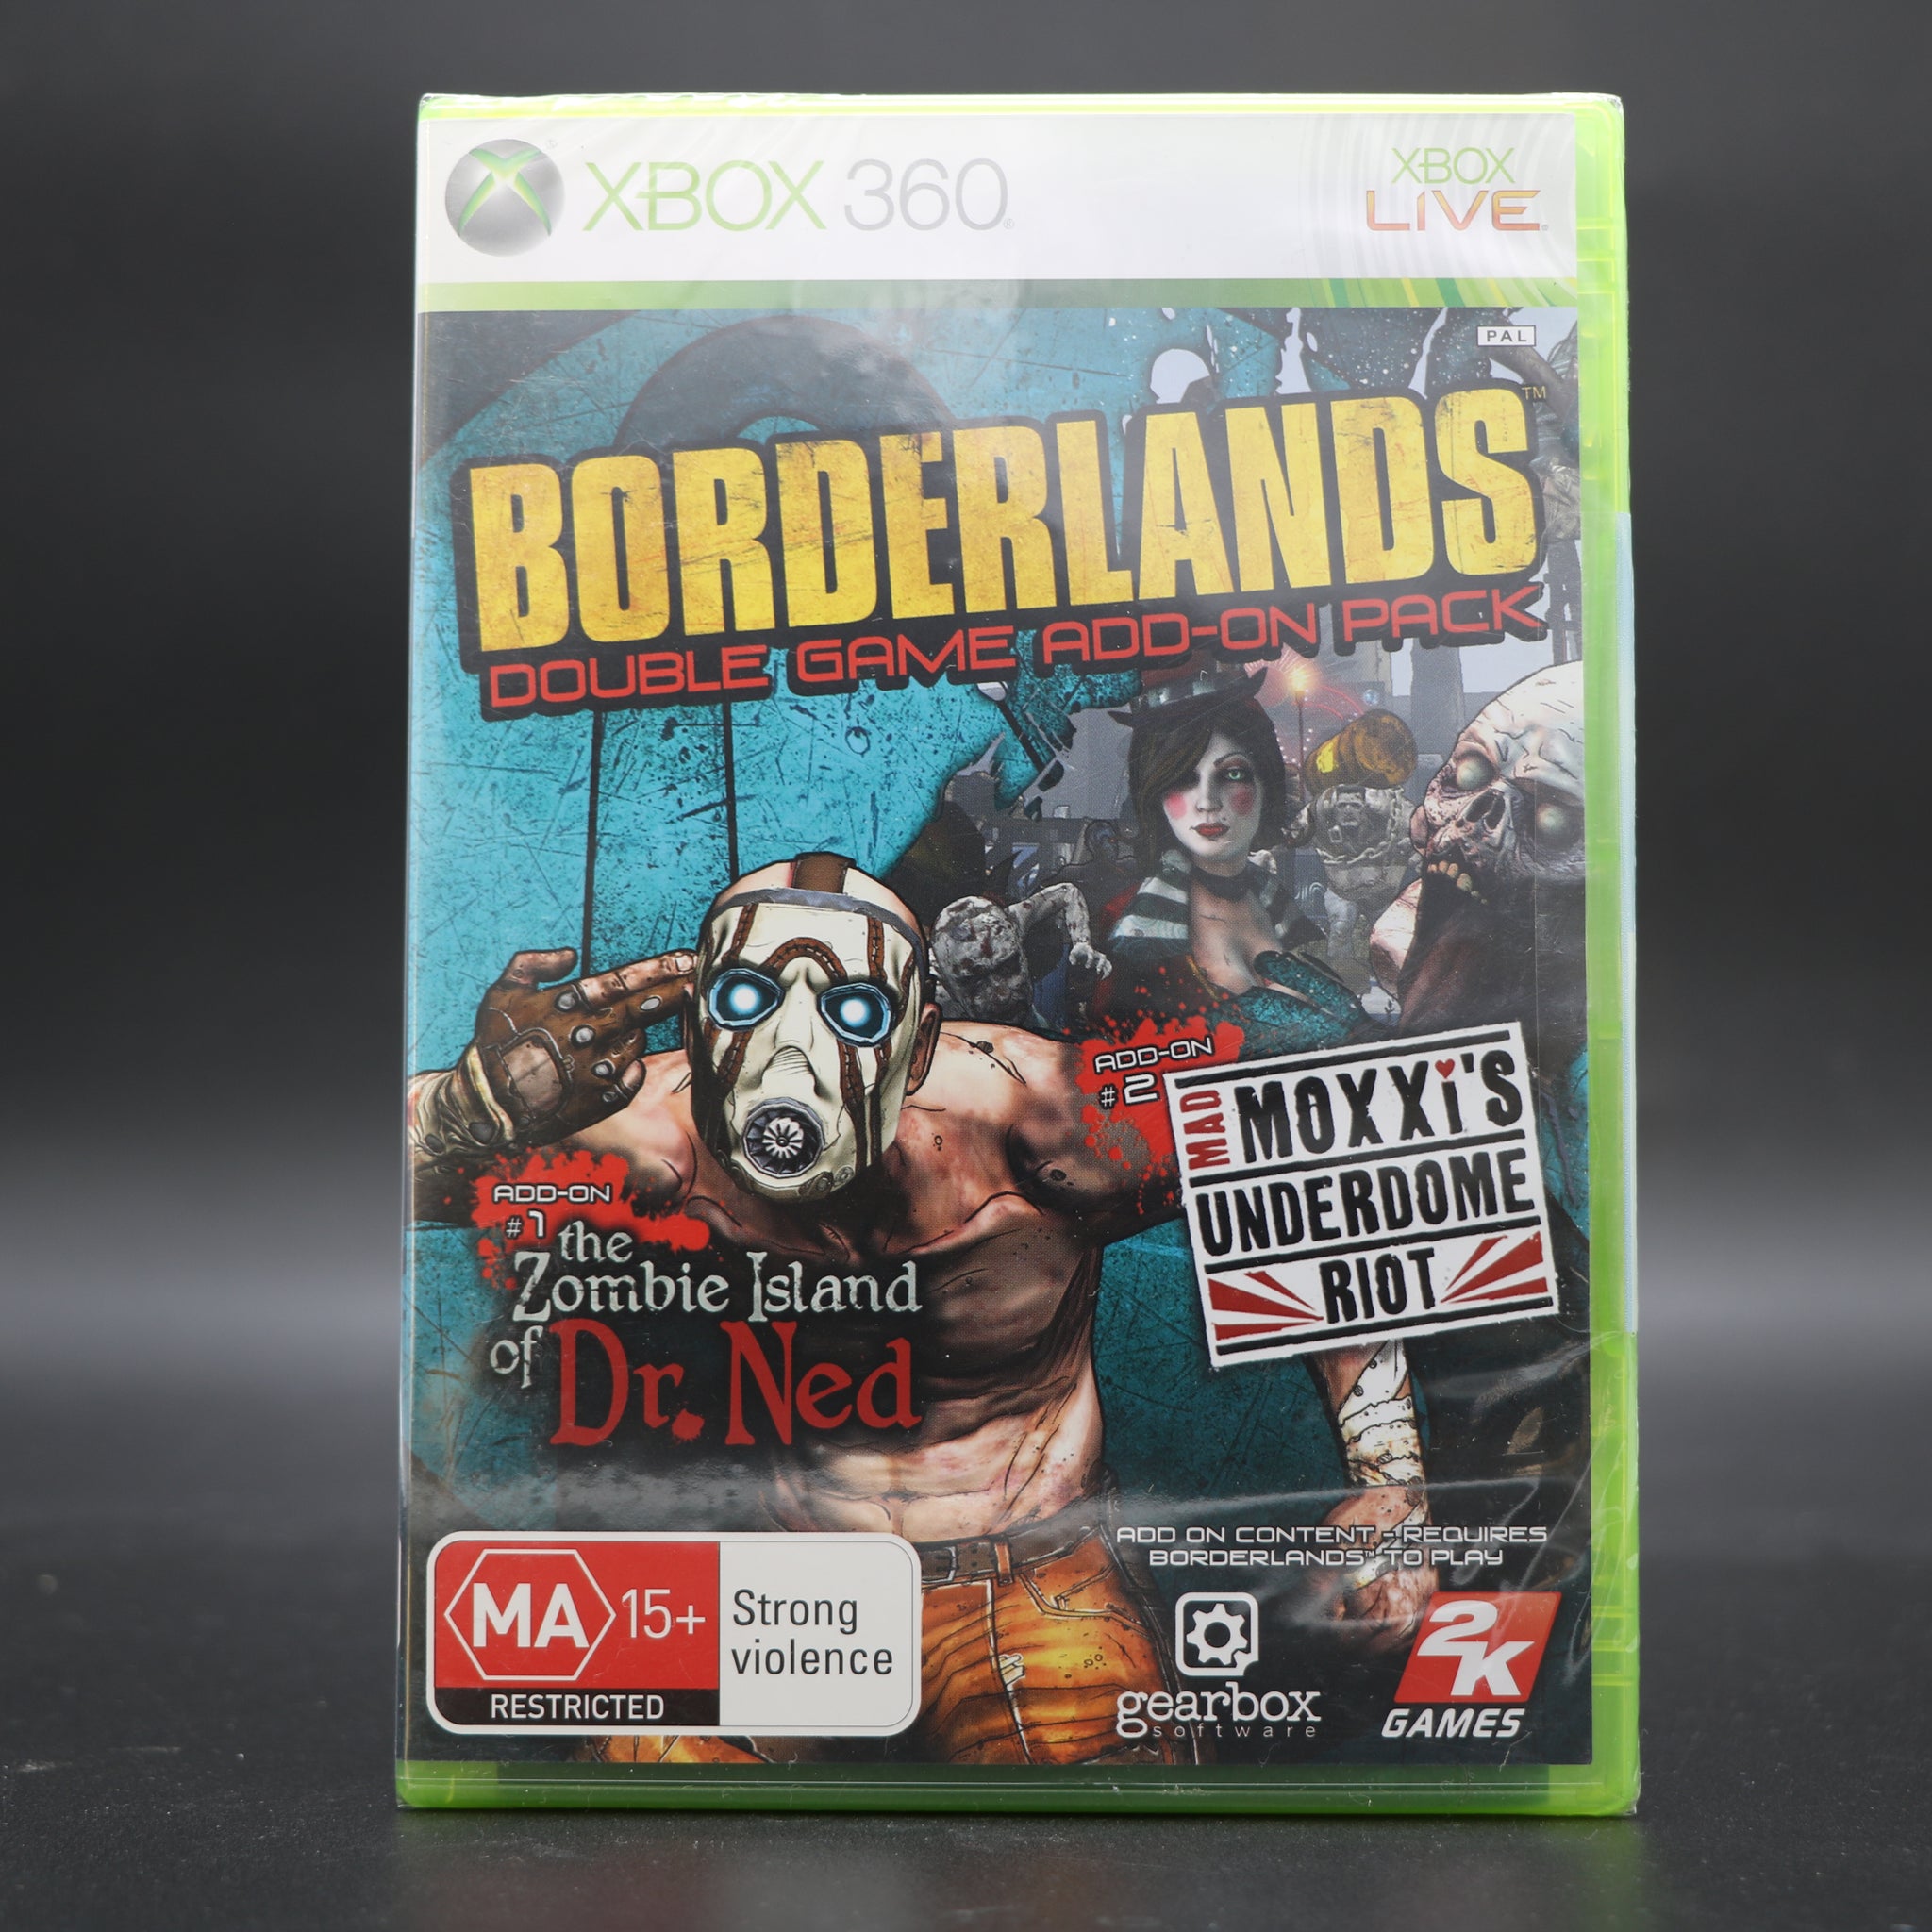 Borderlands | Double Game Add-On Pack | Xbox 360 Game | New & Sealed